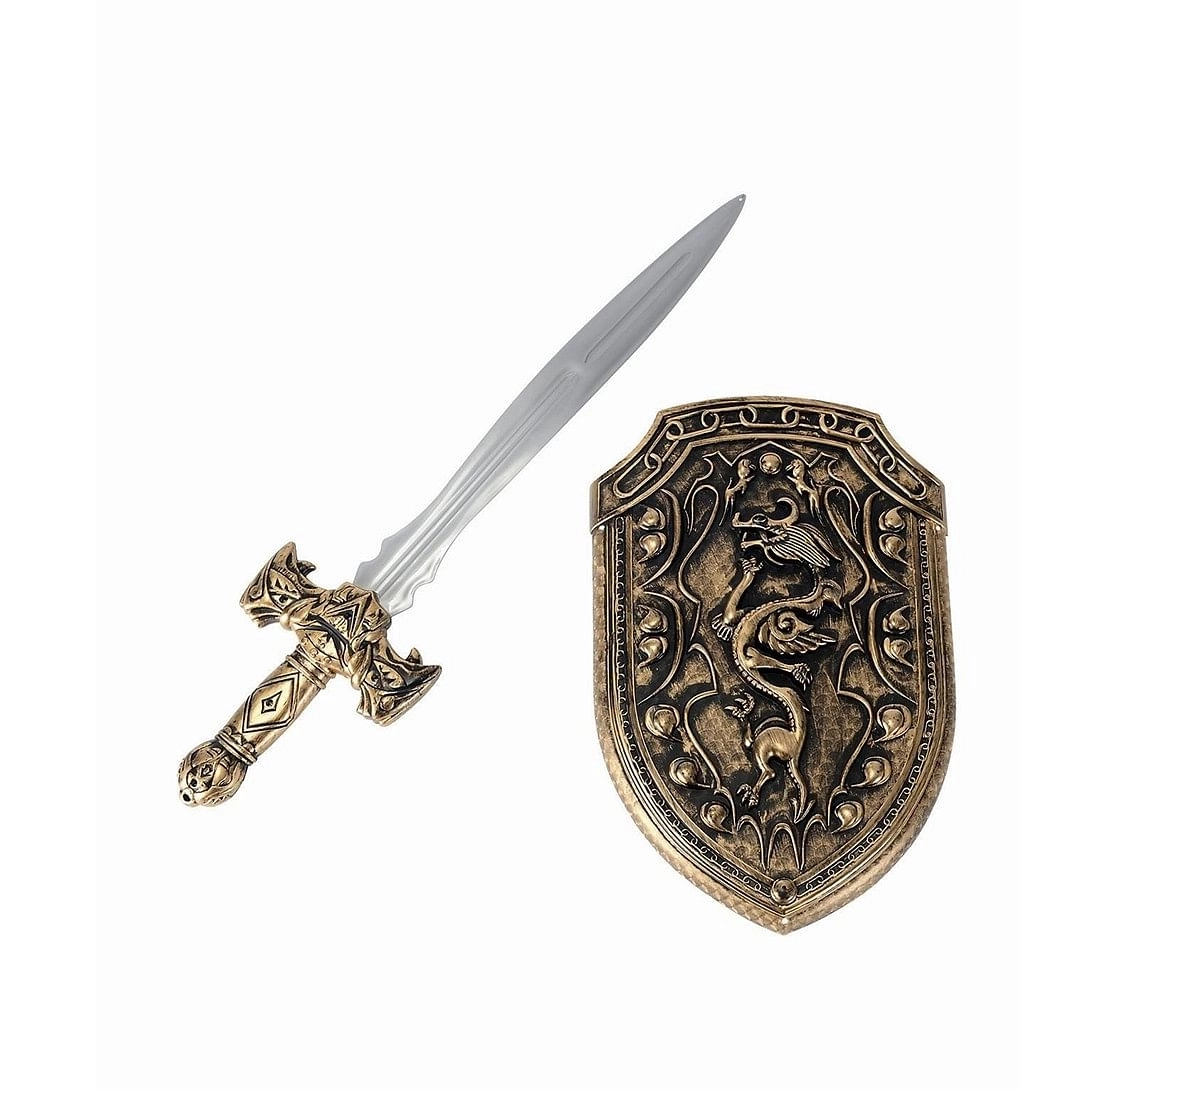 Simba Knights Sword And Shield for Kids age 5Y+